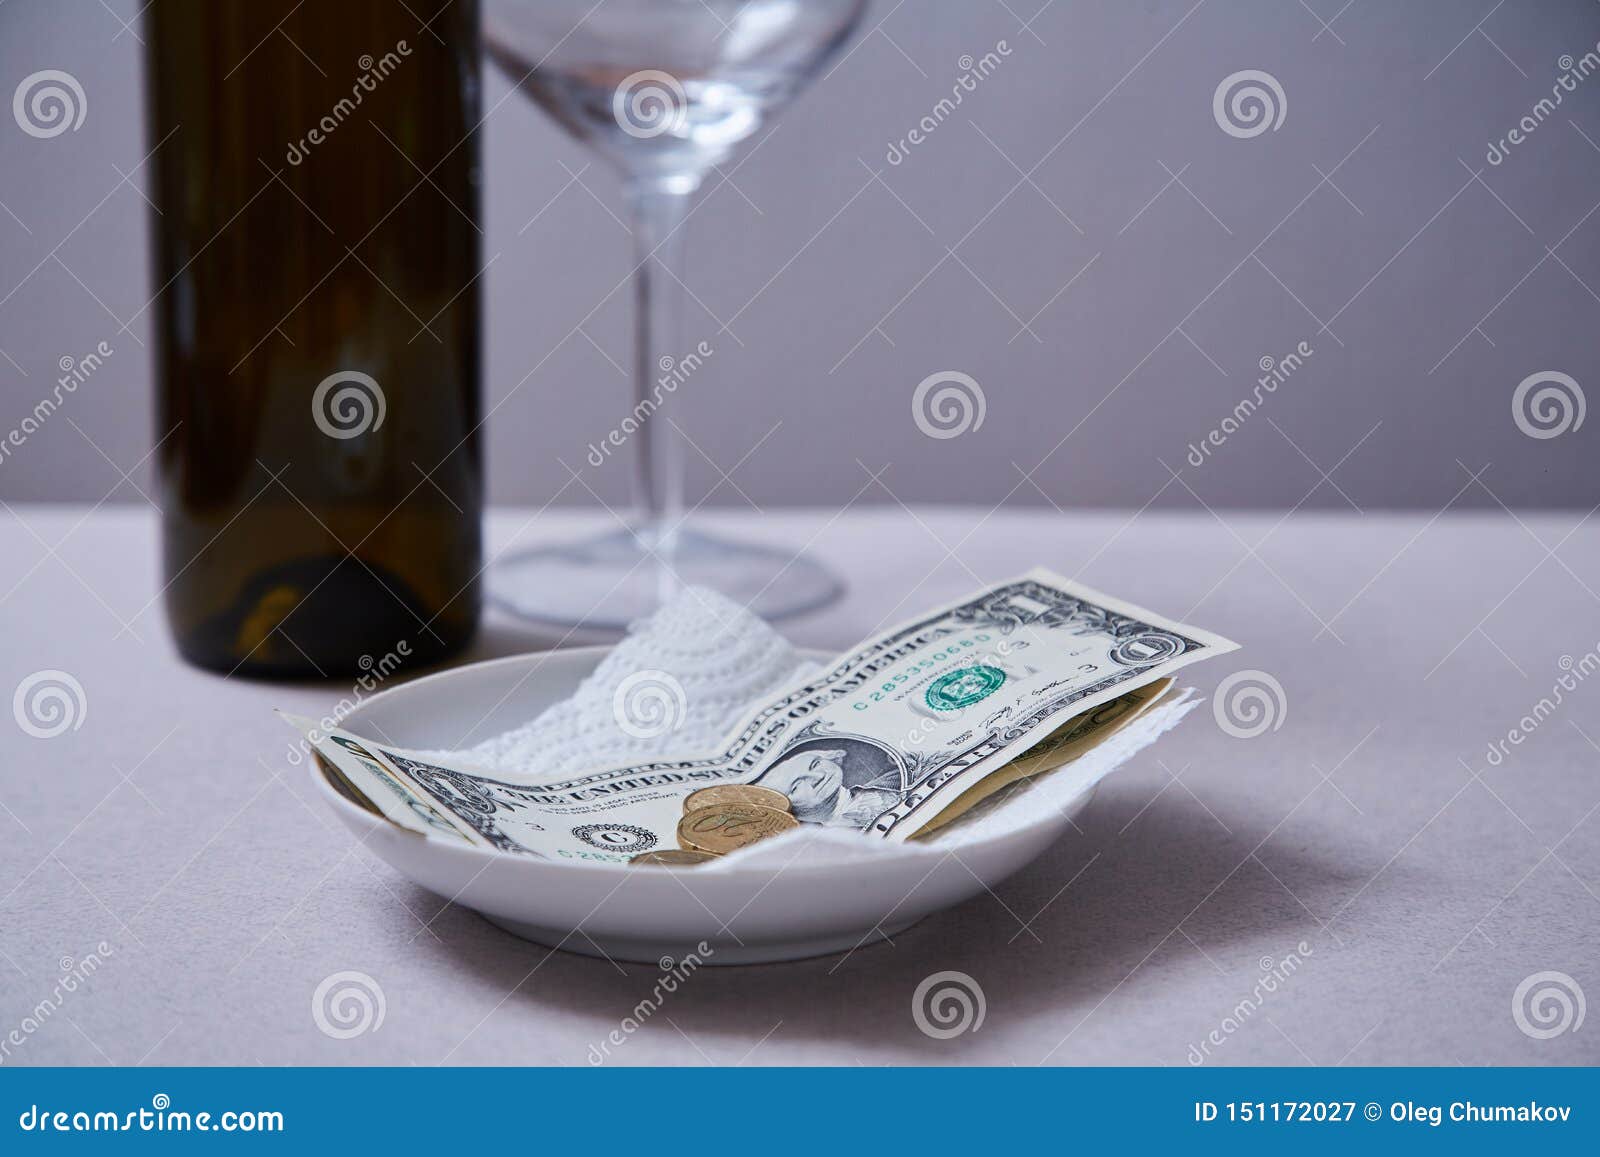 restaurant tips or gratuity. banknotes and coins on a plate